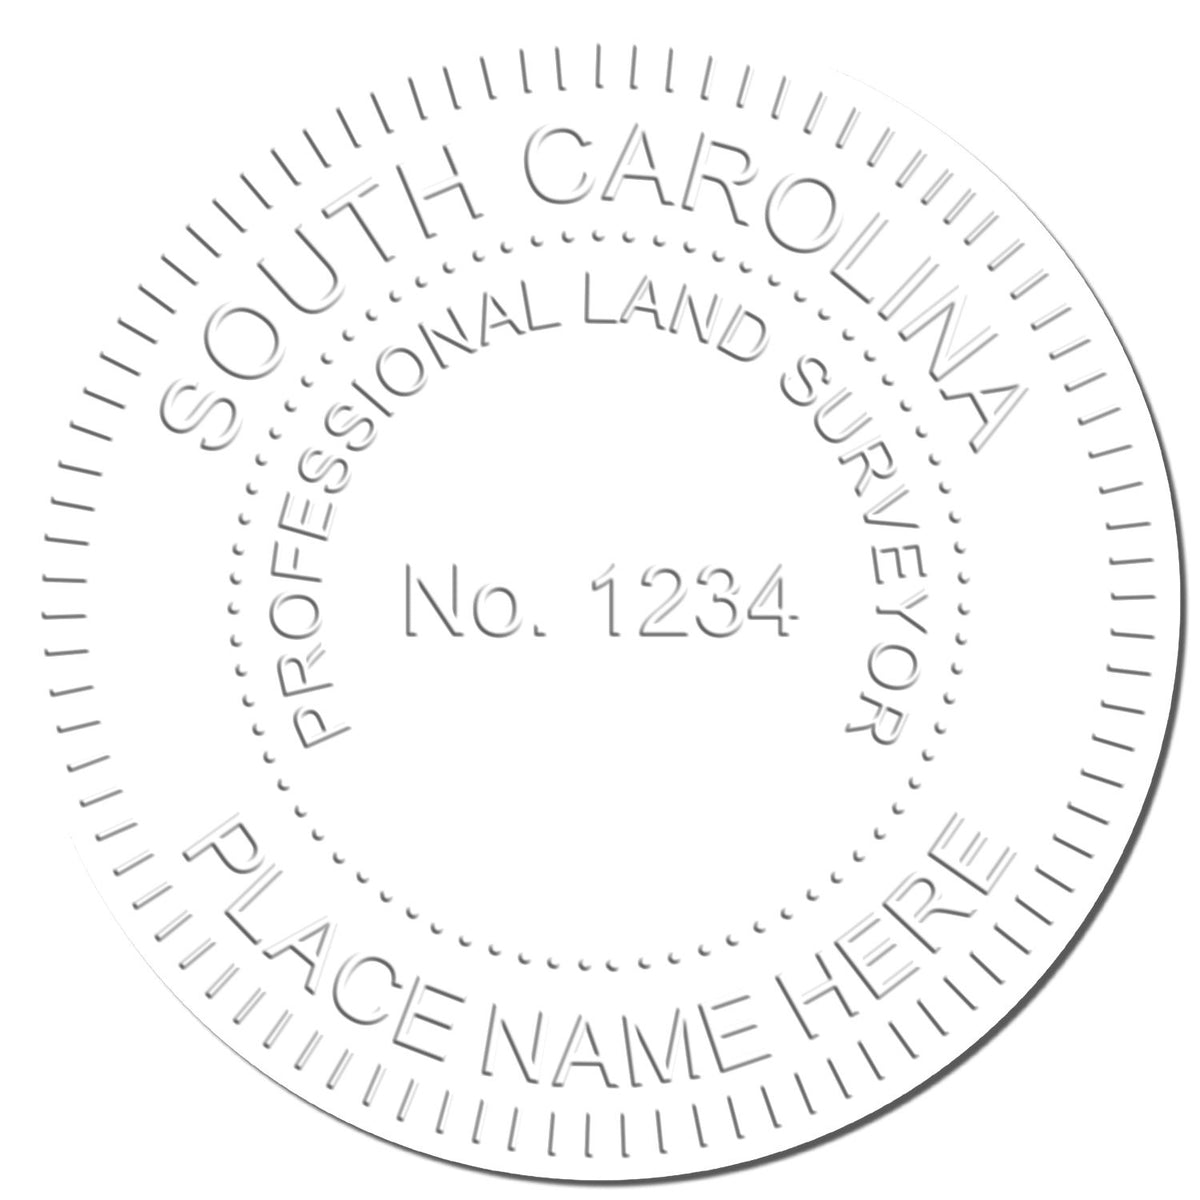 This paper is stamped with a sample imprint of the State of South Carolina Soft Land Surveyor Embossing Seal, signifying its quality and reliability.